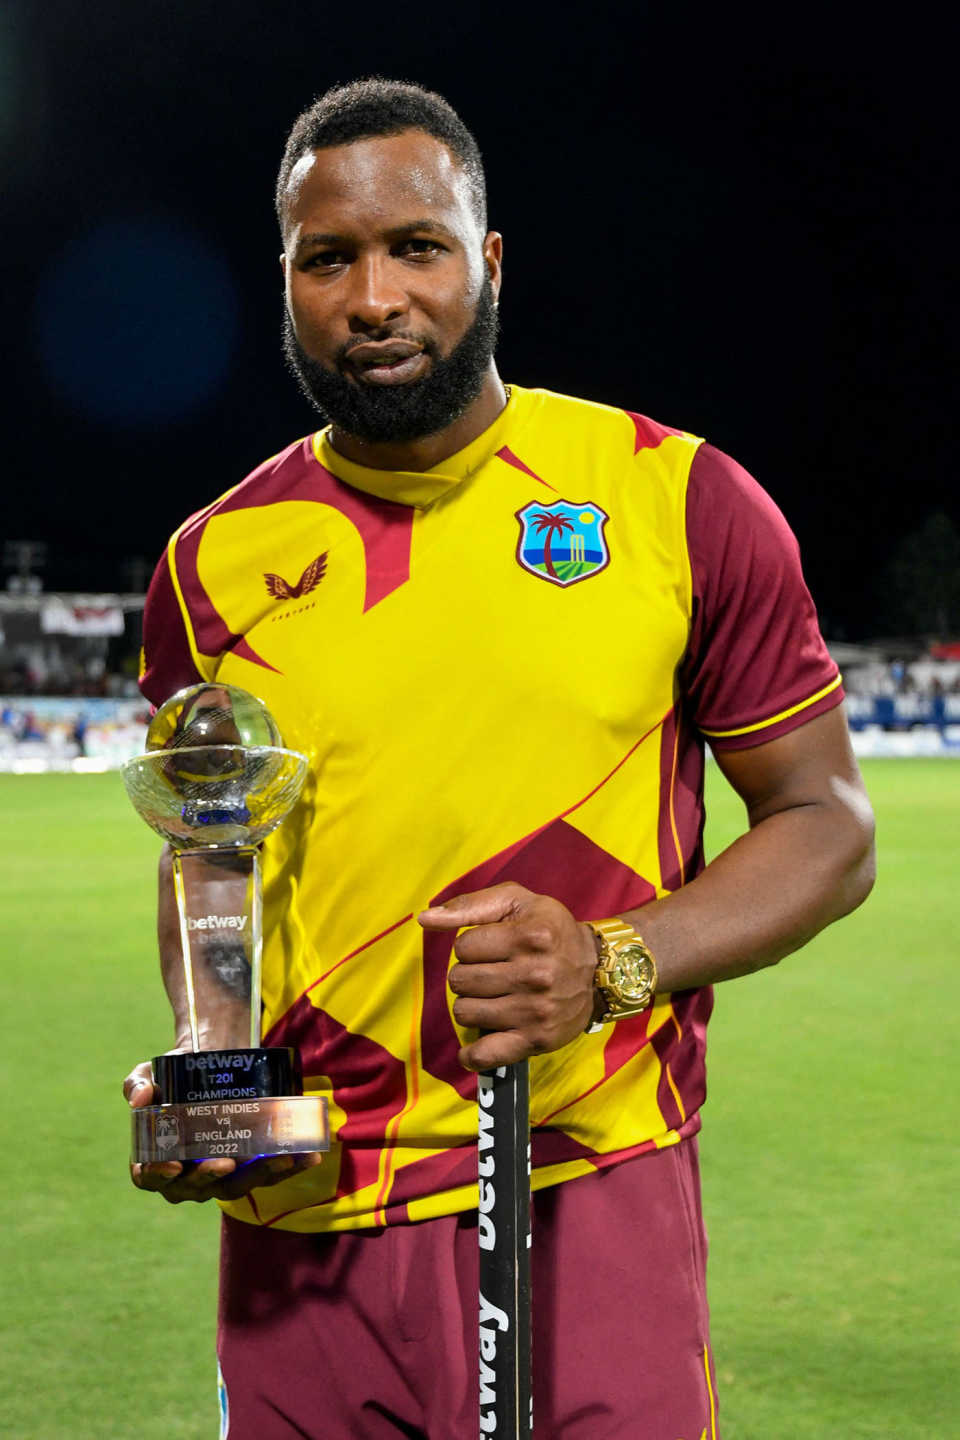 Kieron Pollard poses with the series trophy, West Indies vs England, 5th T20I, Kensington Oval, Barbados, January 30, 2022